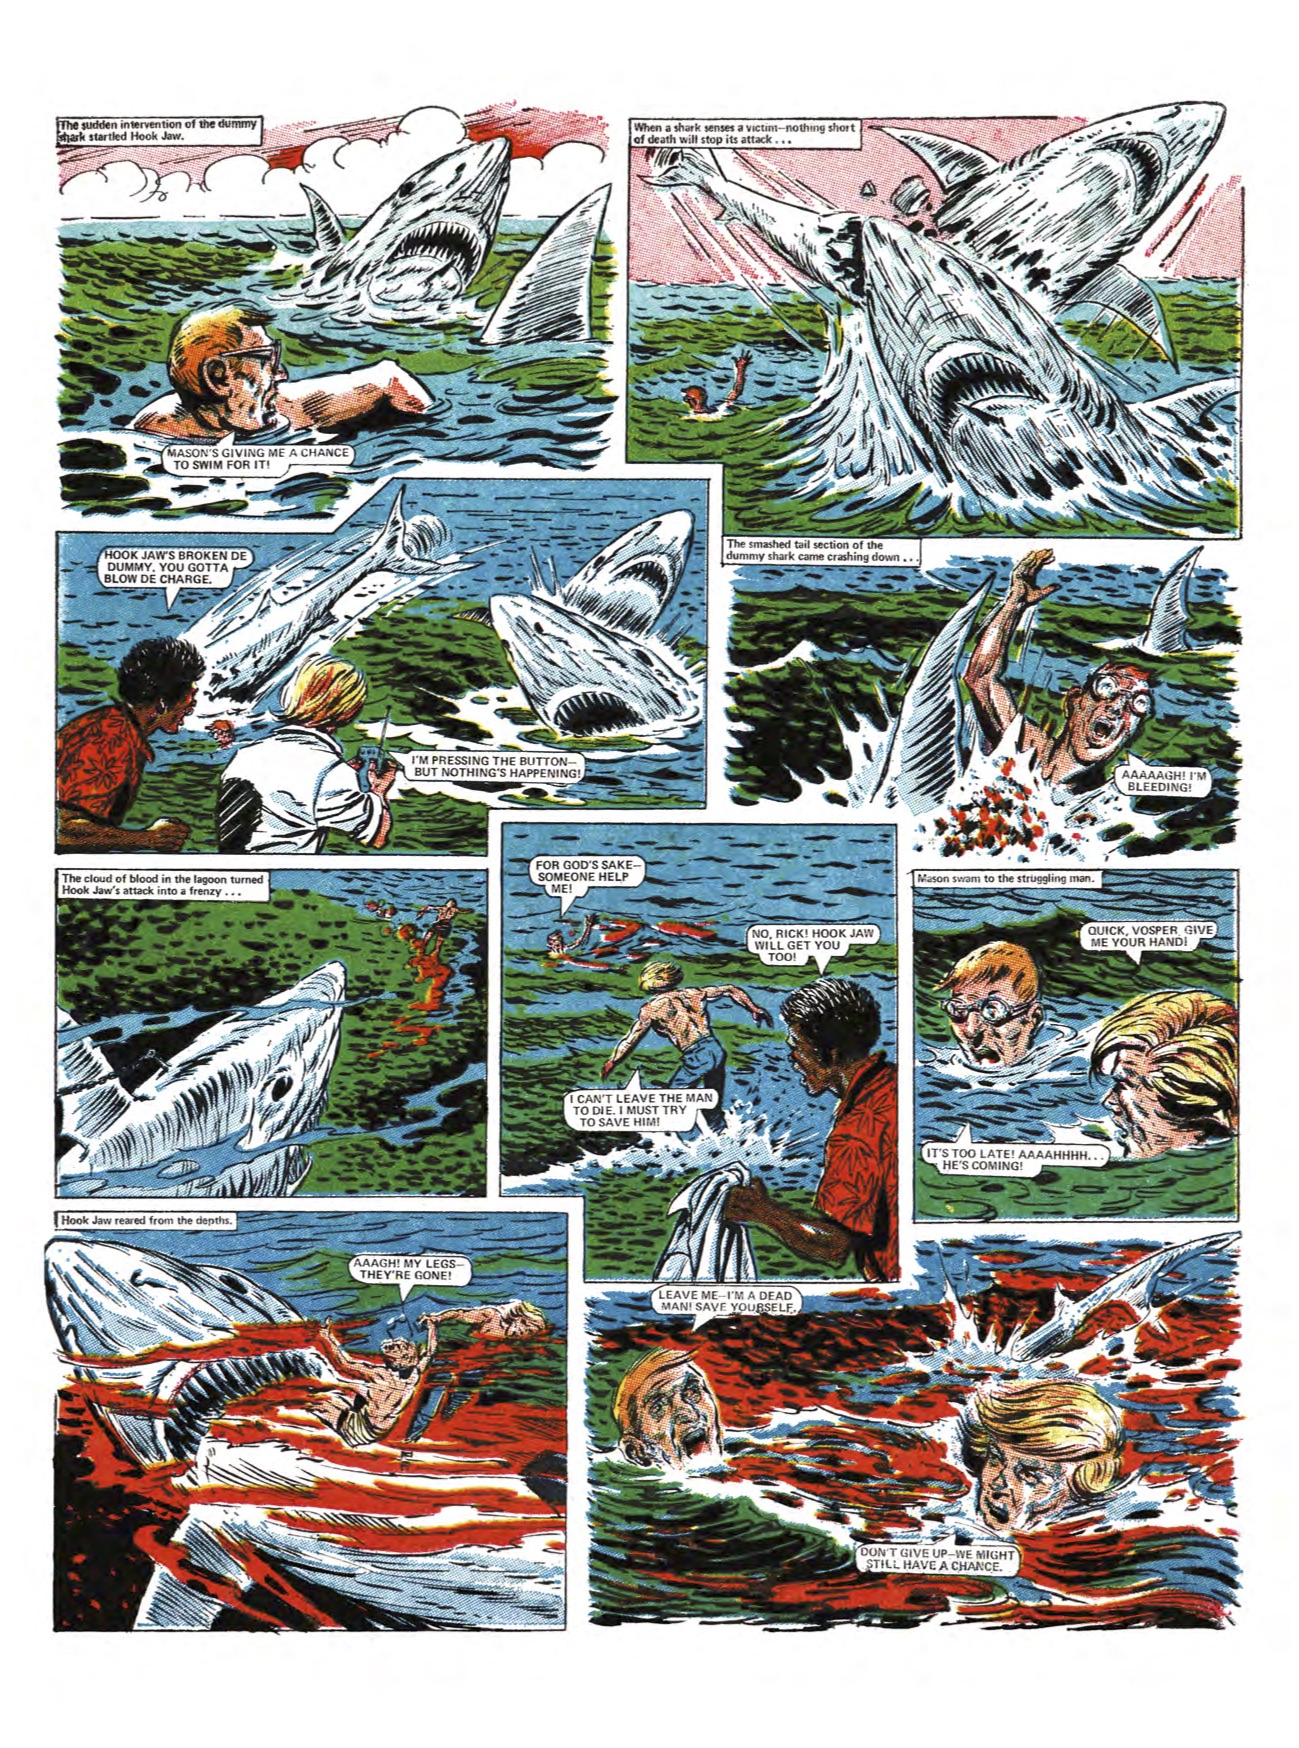 Hook_Jaw_Archive_Page 3